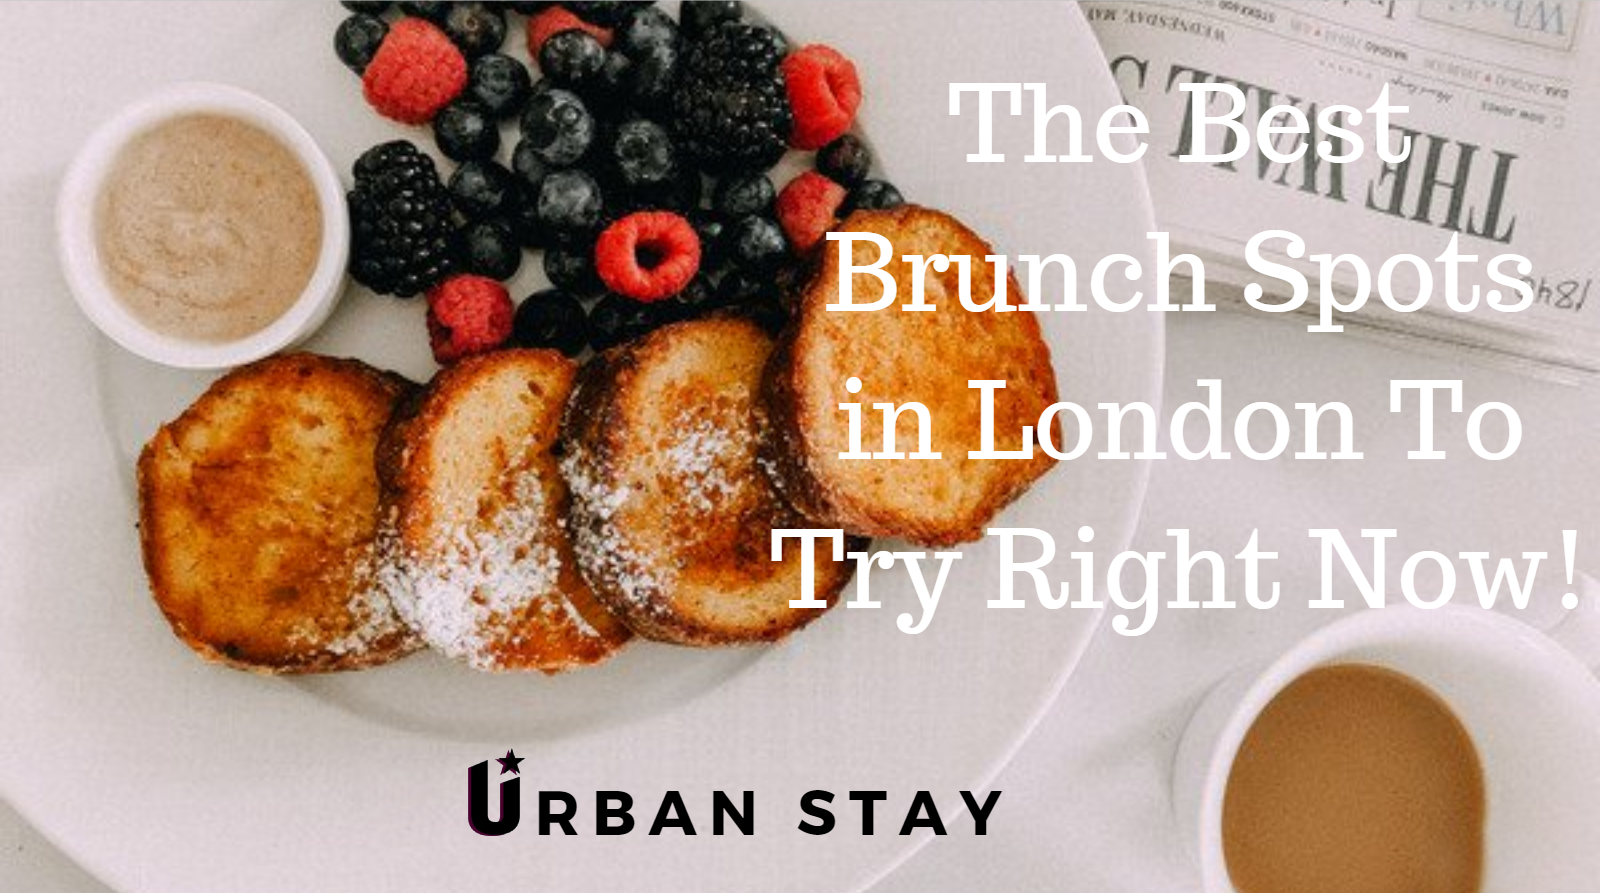 Best Brunch Spots in London ! Centrally located restaurants for your boozy brunch weekend. Affordable prices, highly rated and An extensive menu!